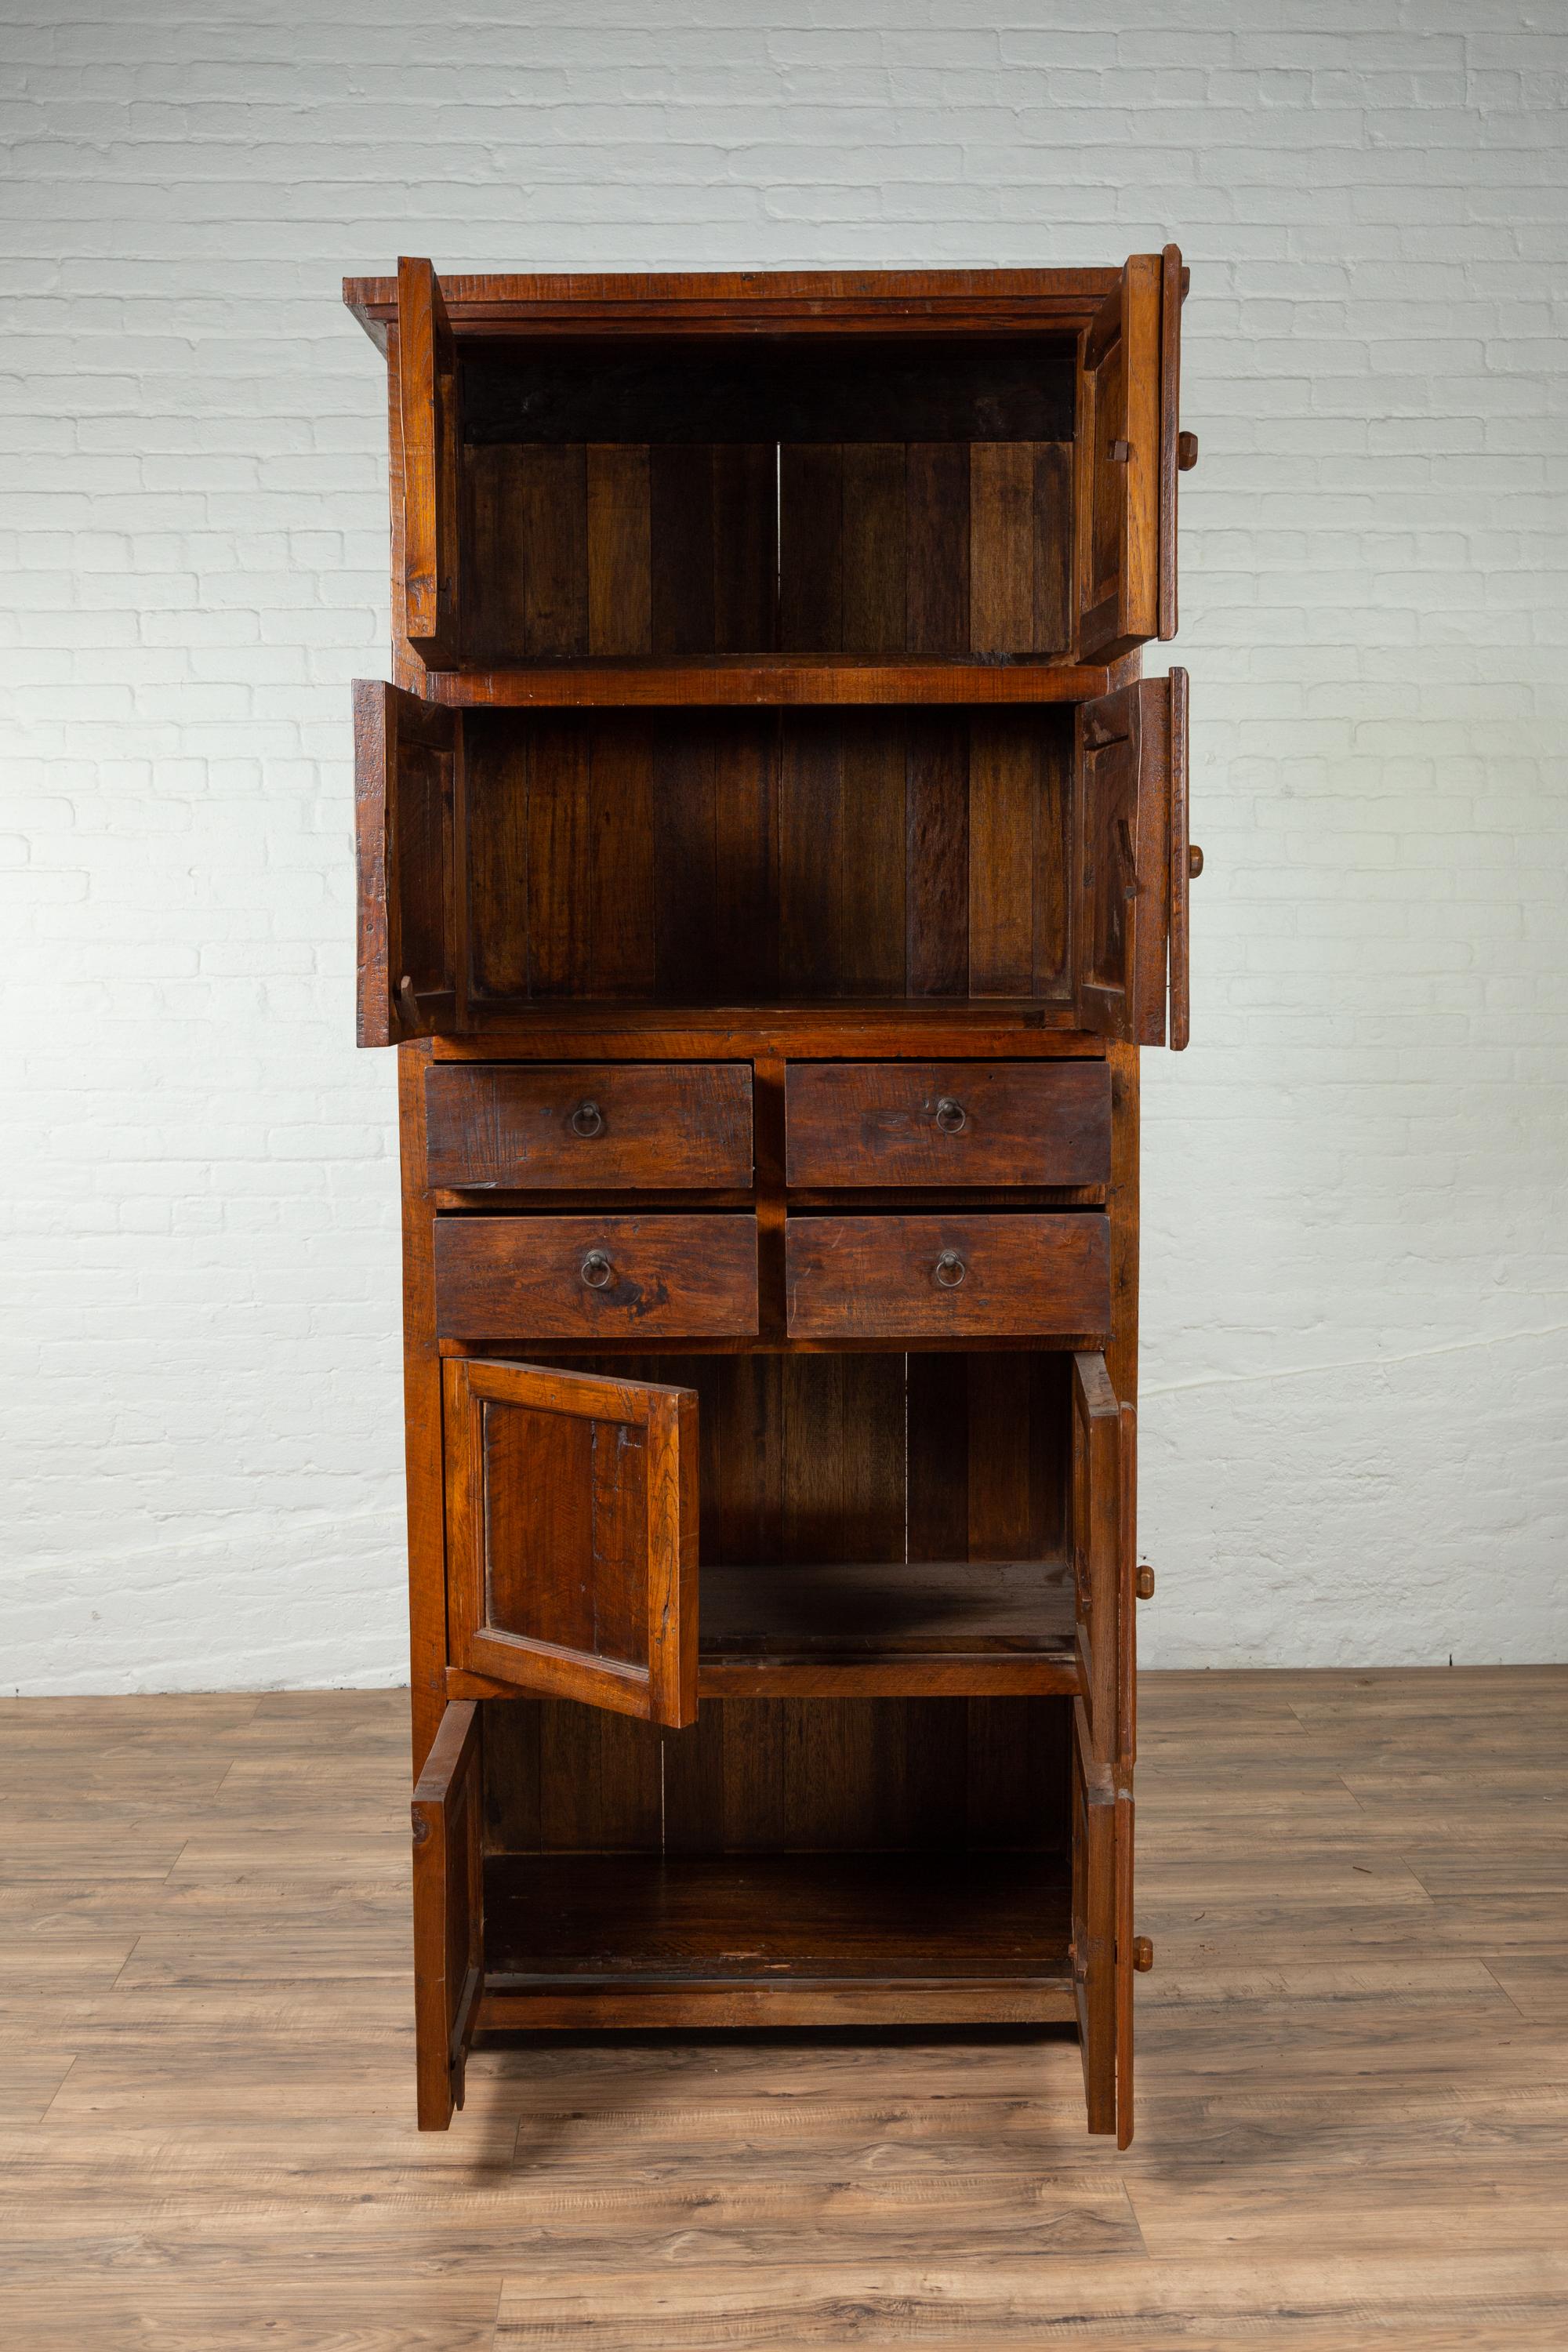 20th Century Tall Antique Javanese Teak Wood Cabinet with Four Double Doors and Drawers